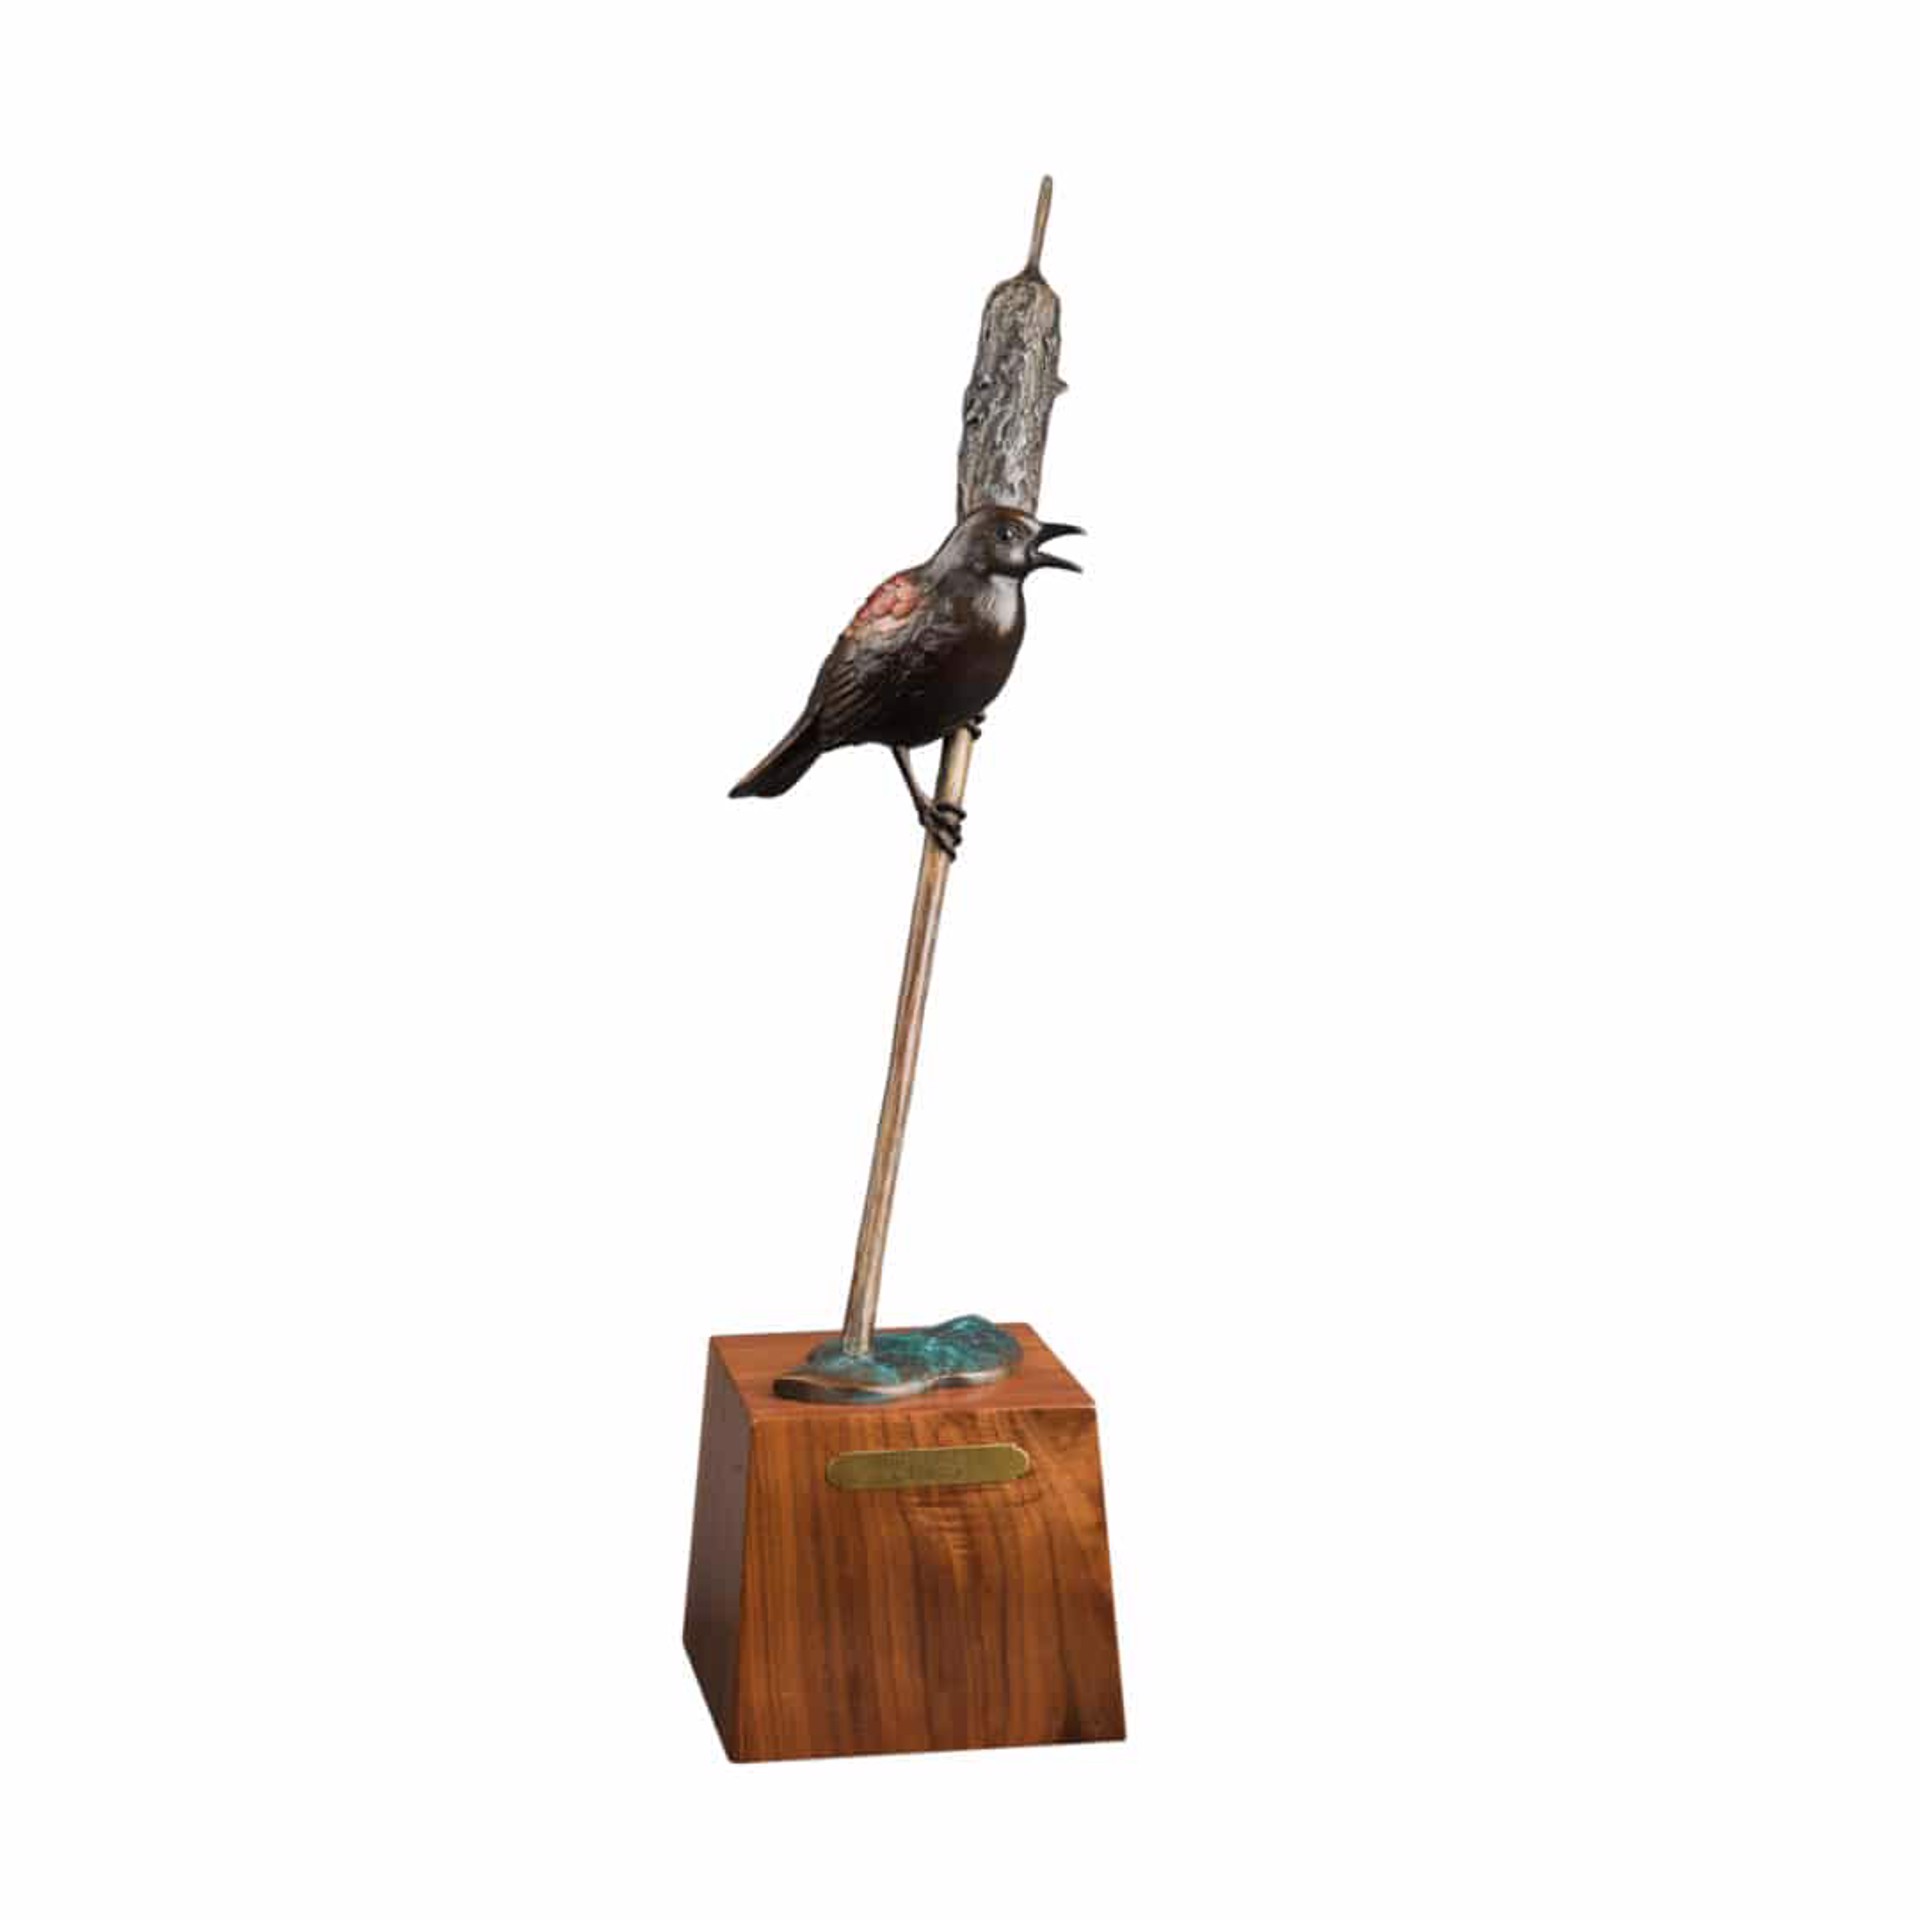 Red Wing Black Bird Original Bronze Sculpture by Rip and Alison Caswell, Contemporary Fine Art, Modern Wildlife Art, Available At Gallery Wild